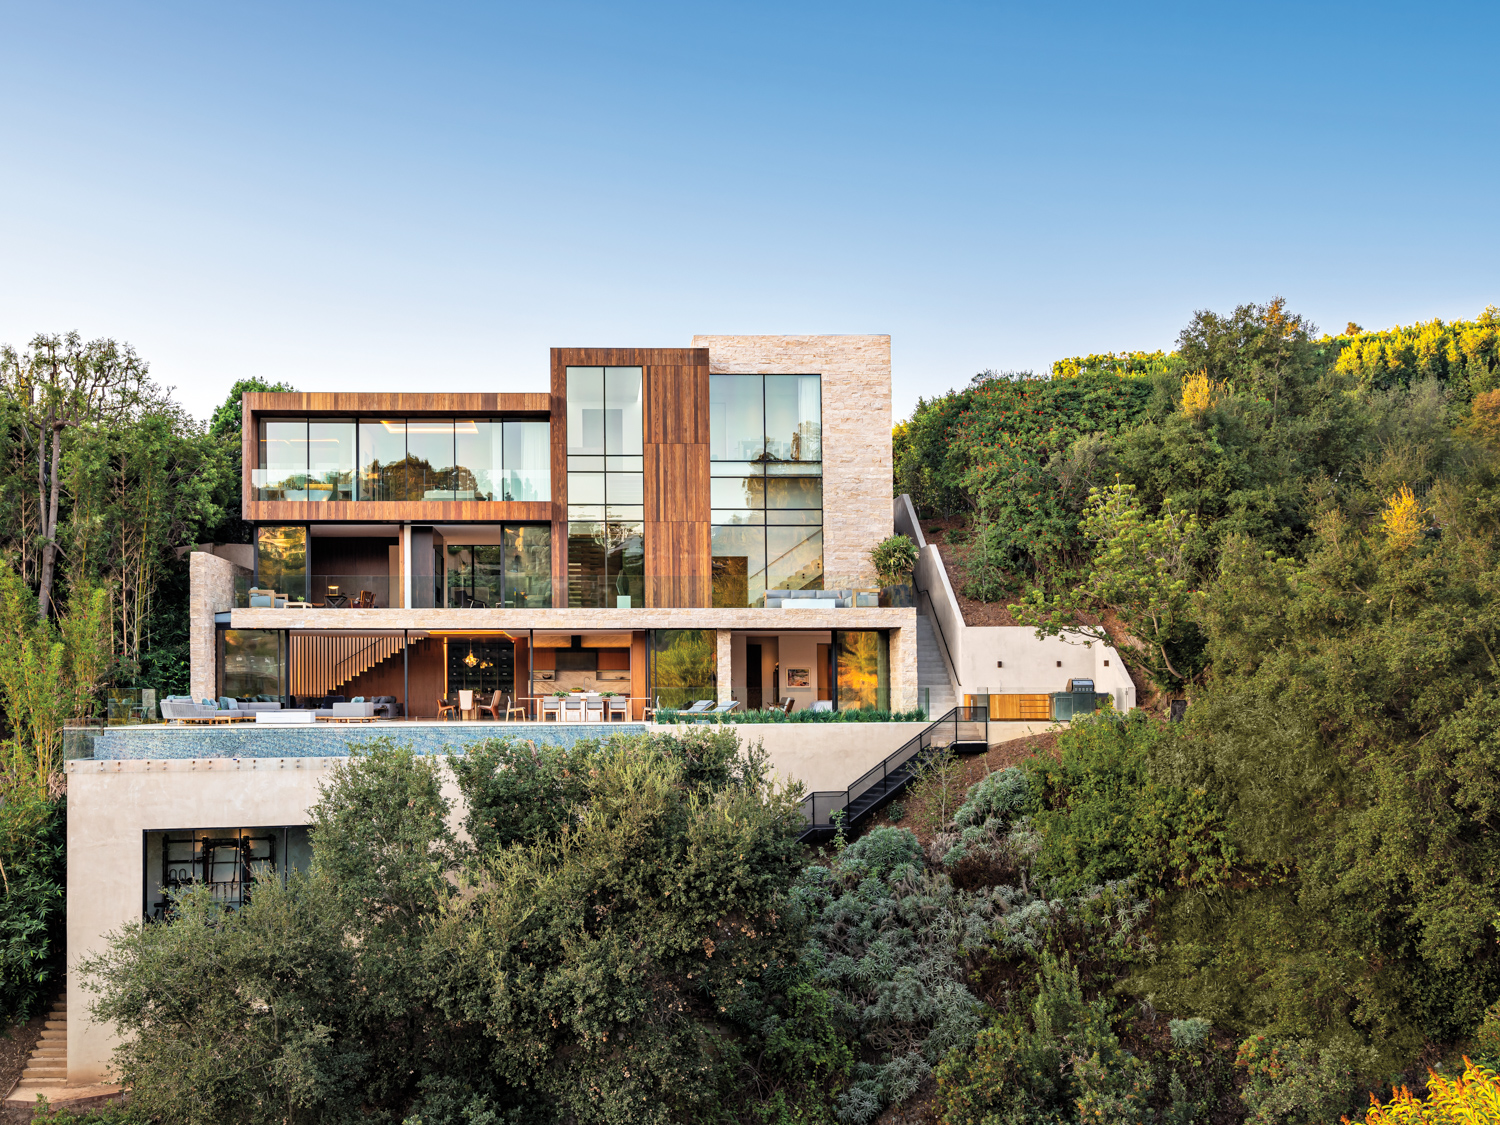 rear façade and expansive pool terrace of a Pacific Palisades home, with outdoor seating and a fire pit